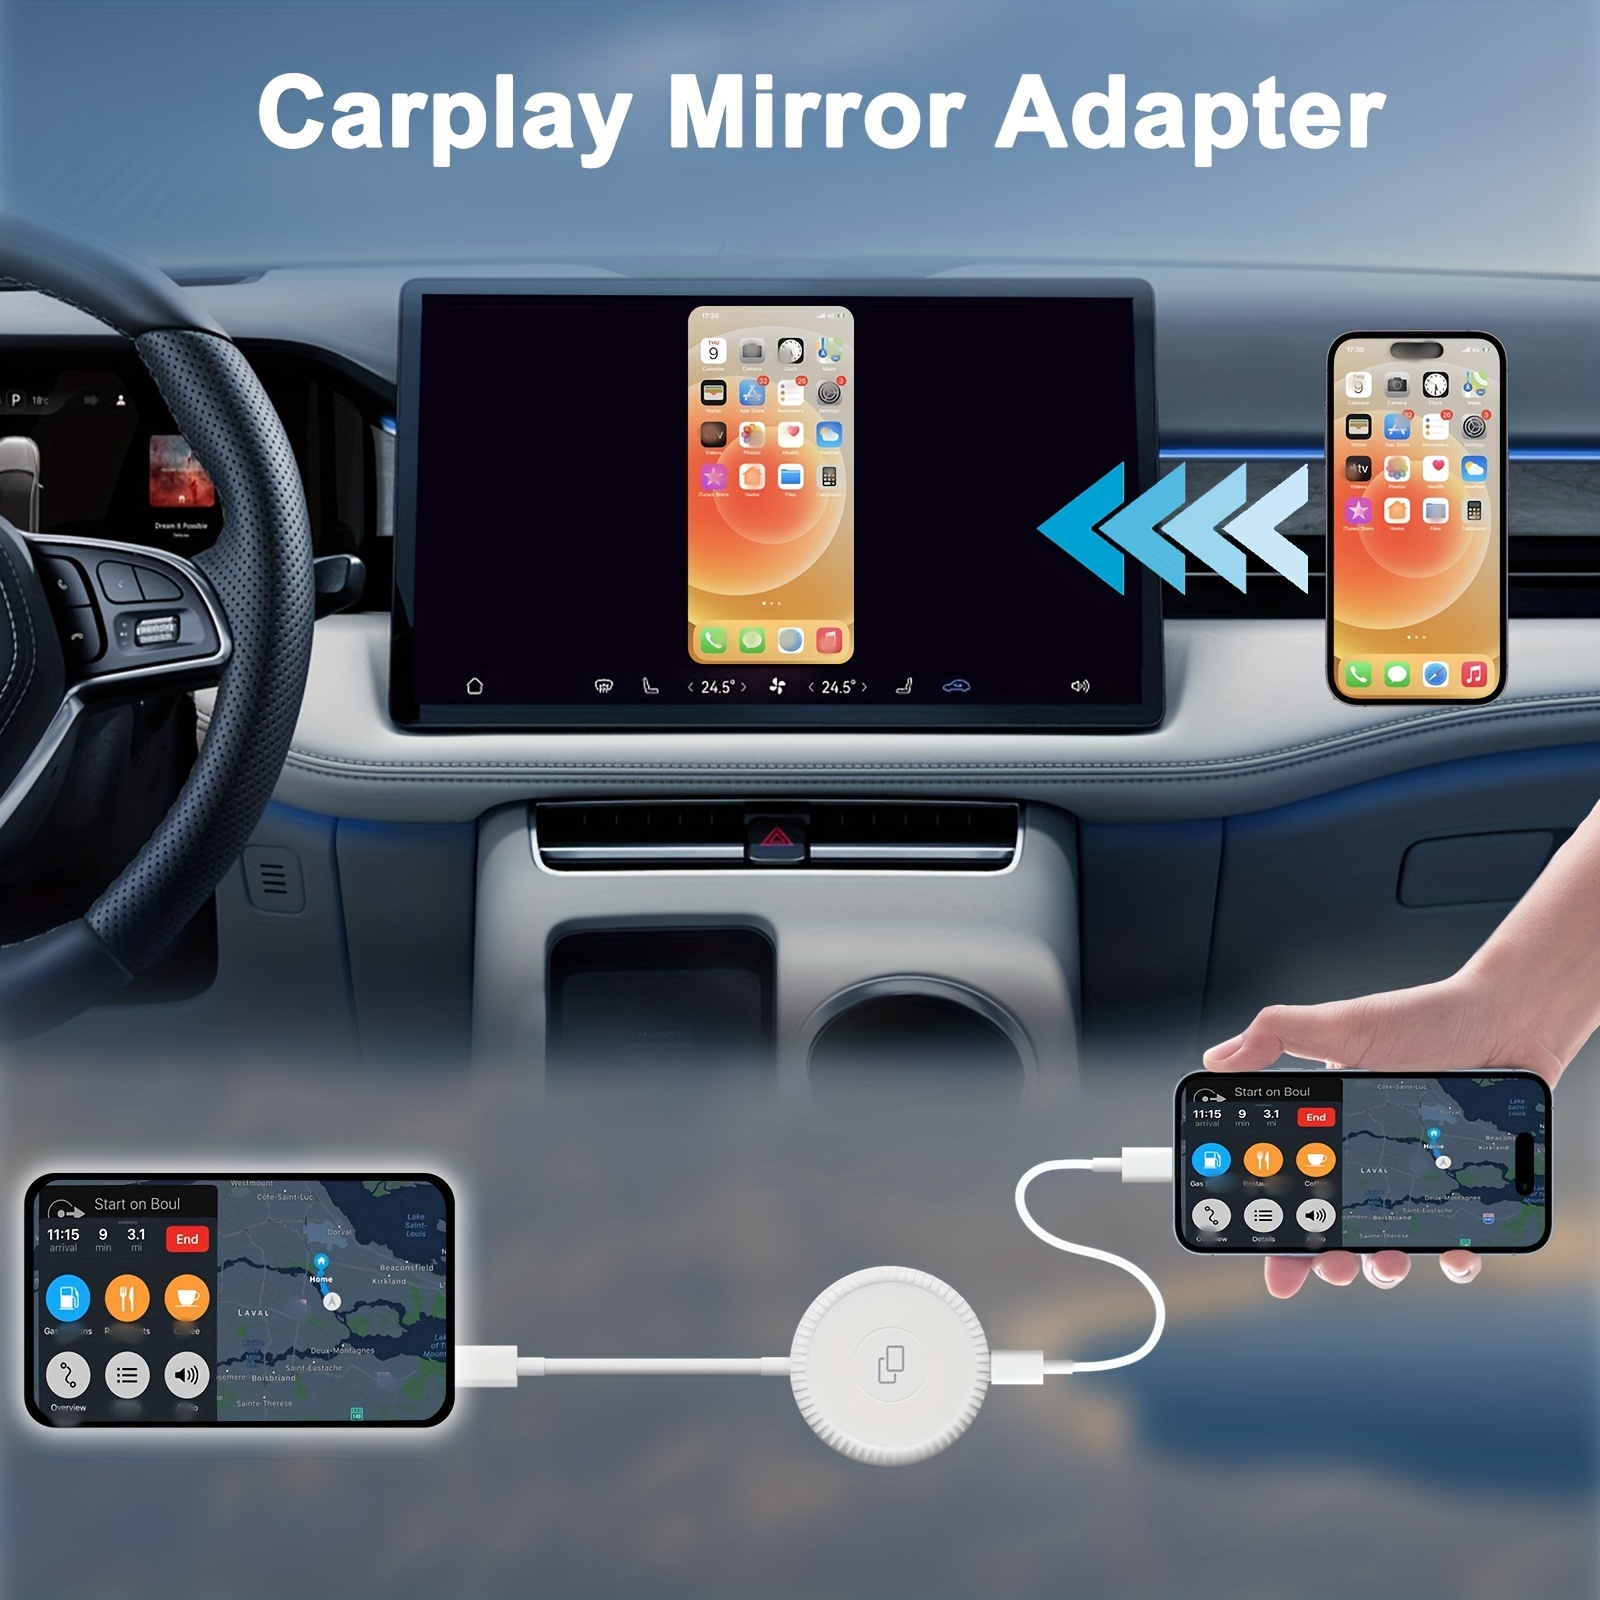 For Wireless CarPlay Box Android Auto Dongle Car Player N